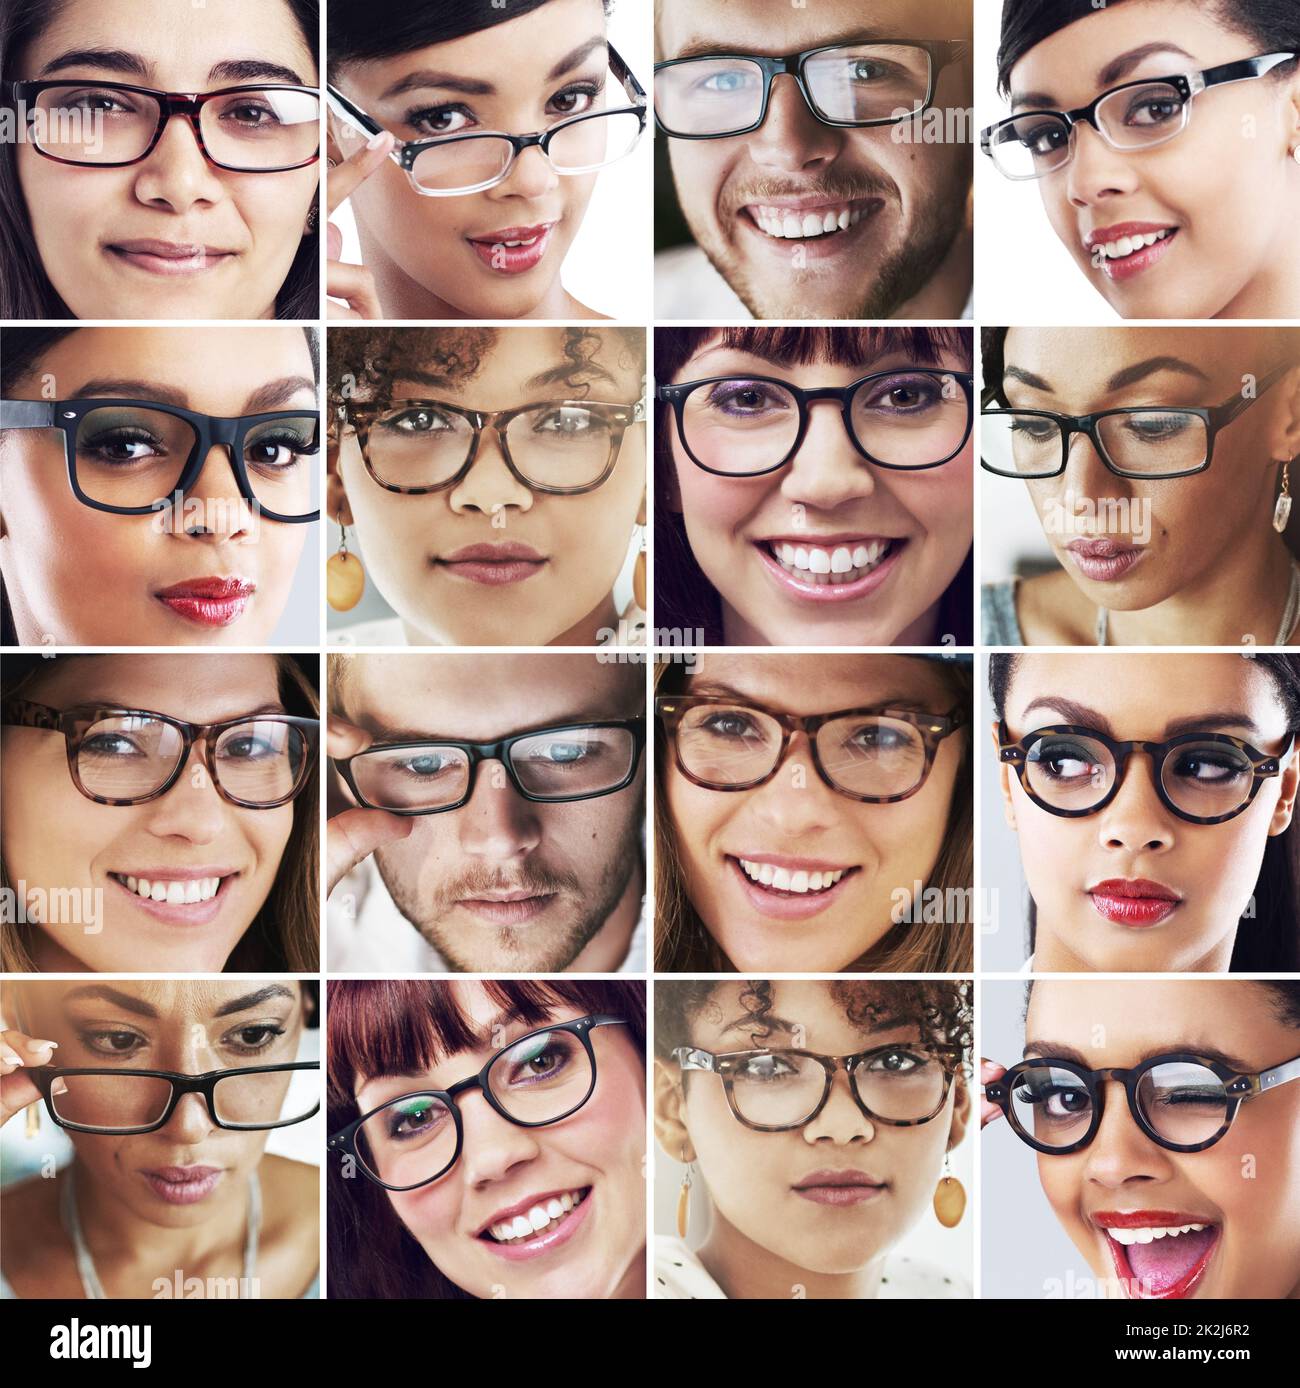 Variety of visions. Composite image of a diverse group of people wearing spectacles. Stock Photo